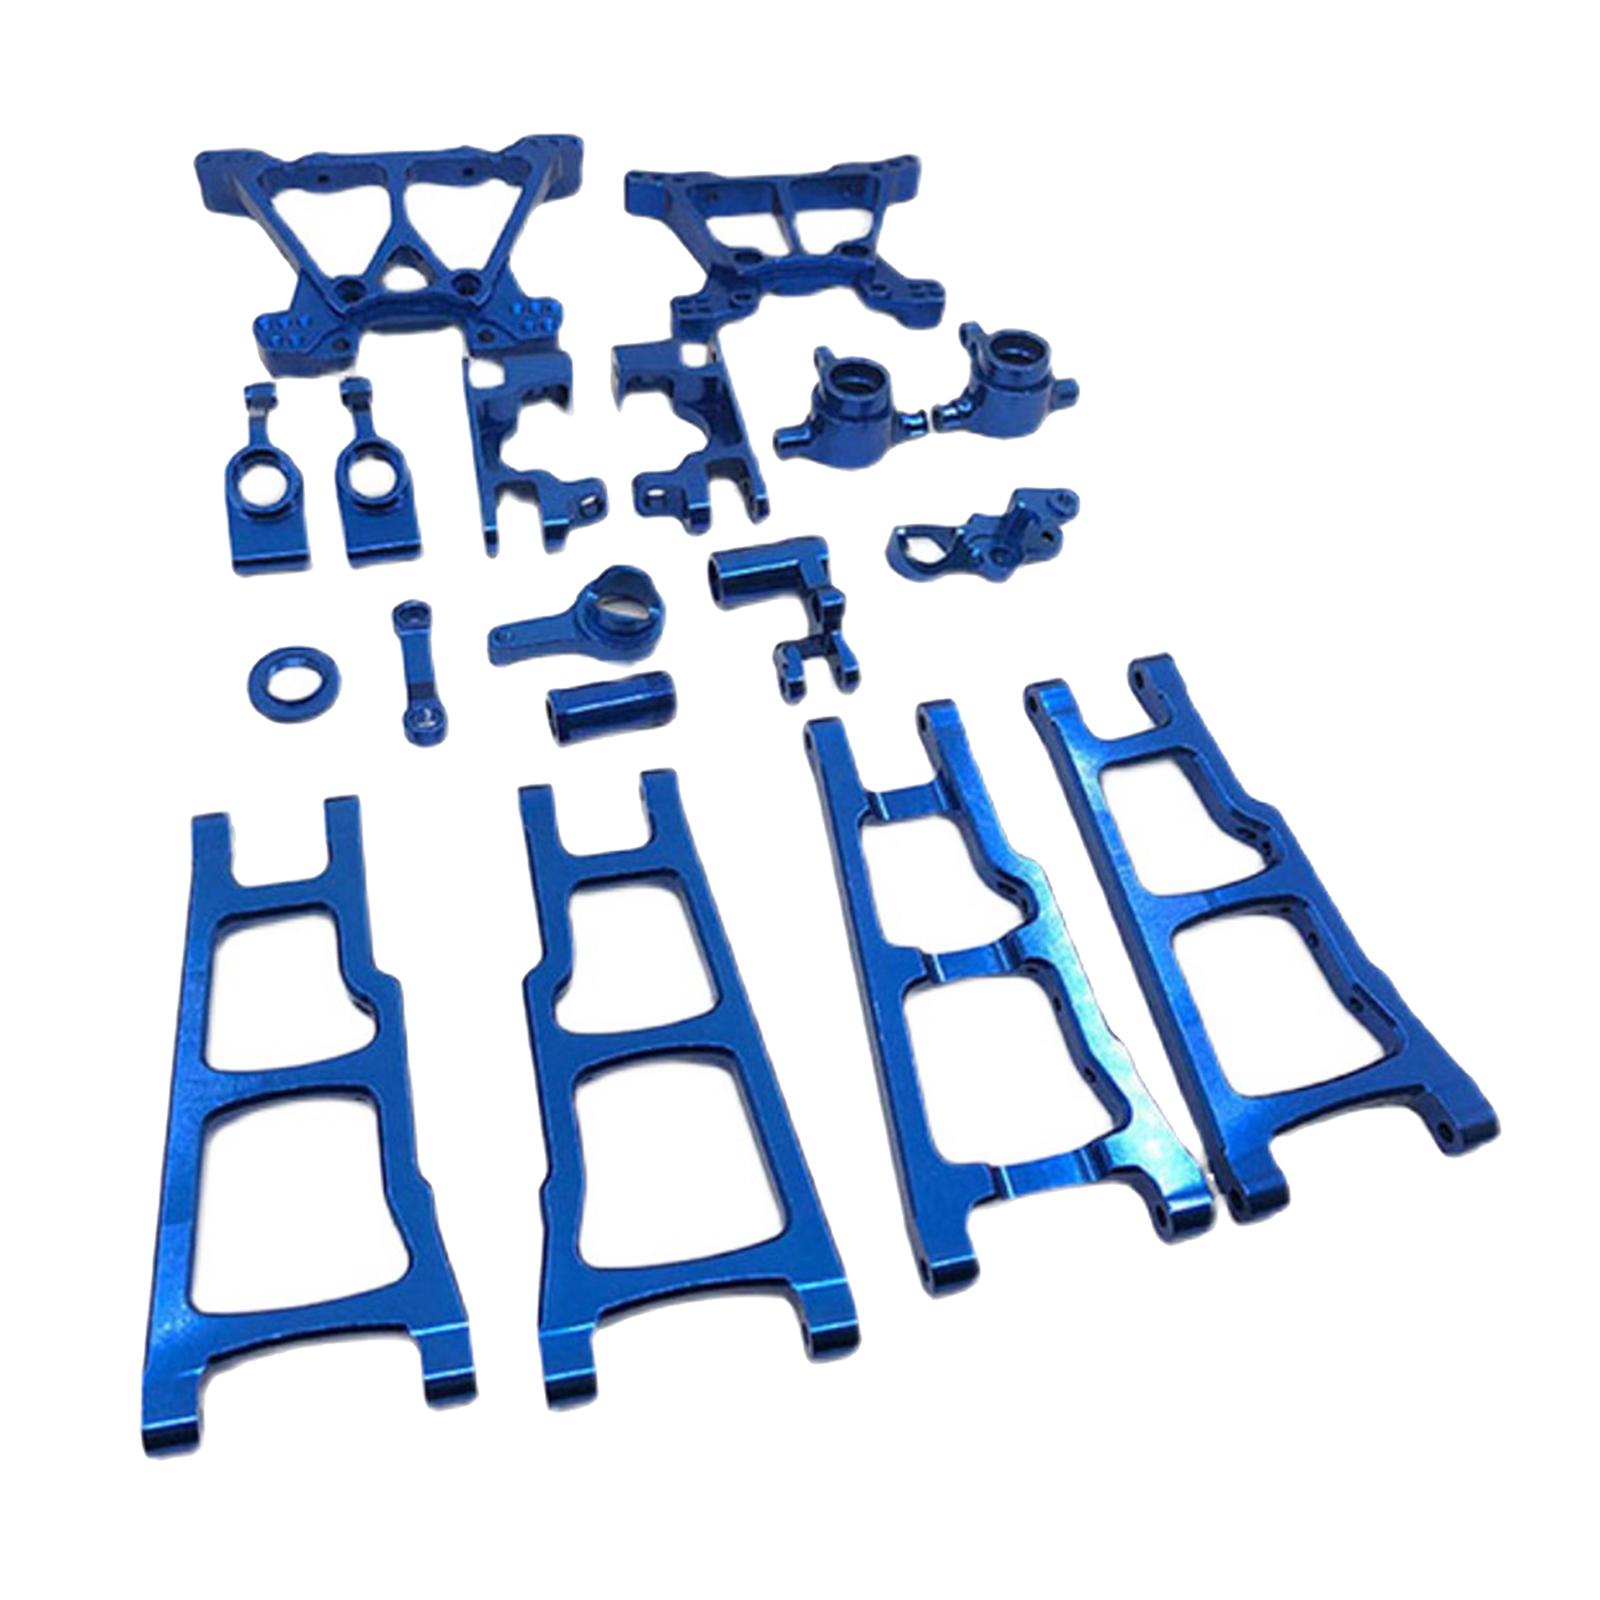 Part & Accessory Chassis Parts for Slash 4X4 HQ727 1/10 RC Truck Blue